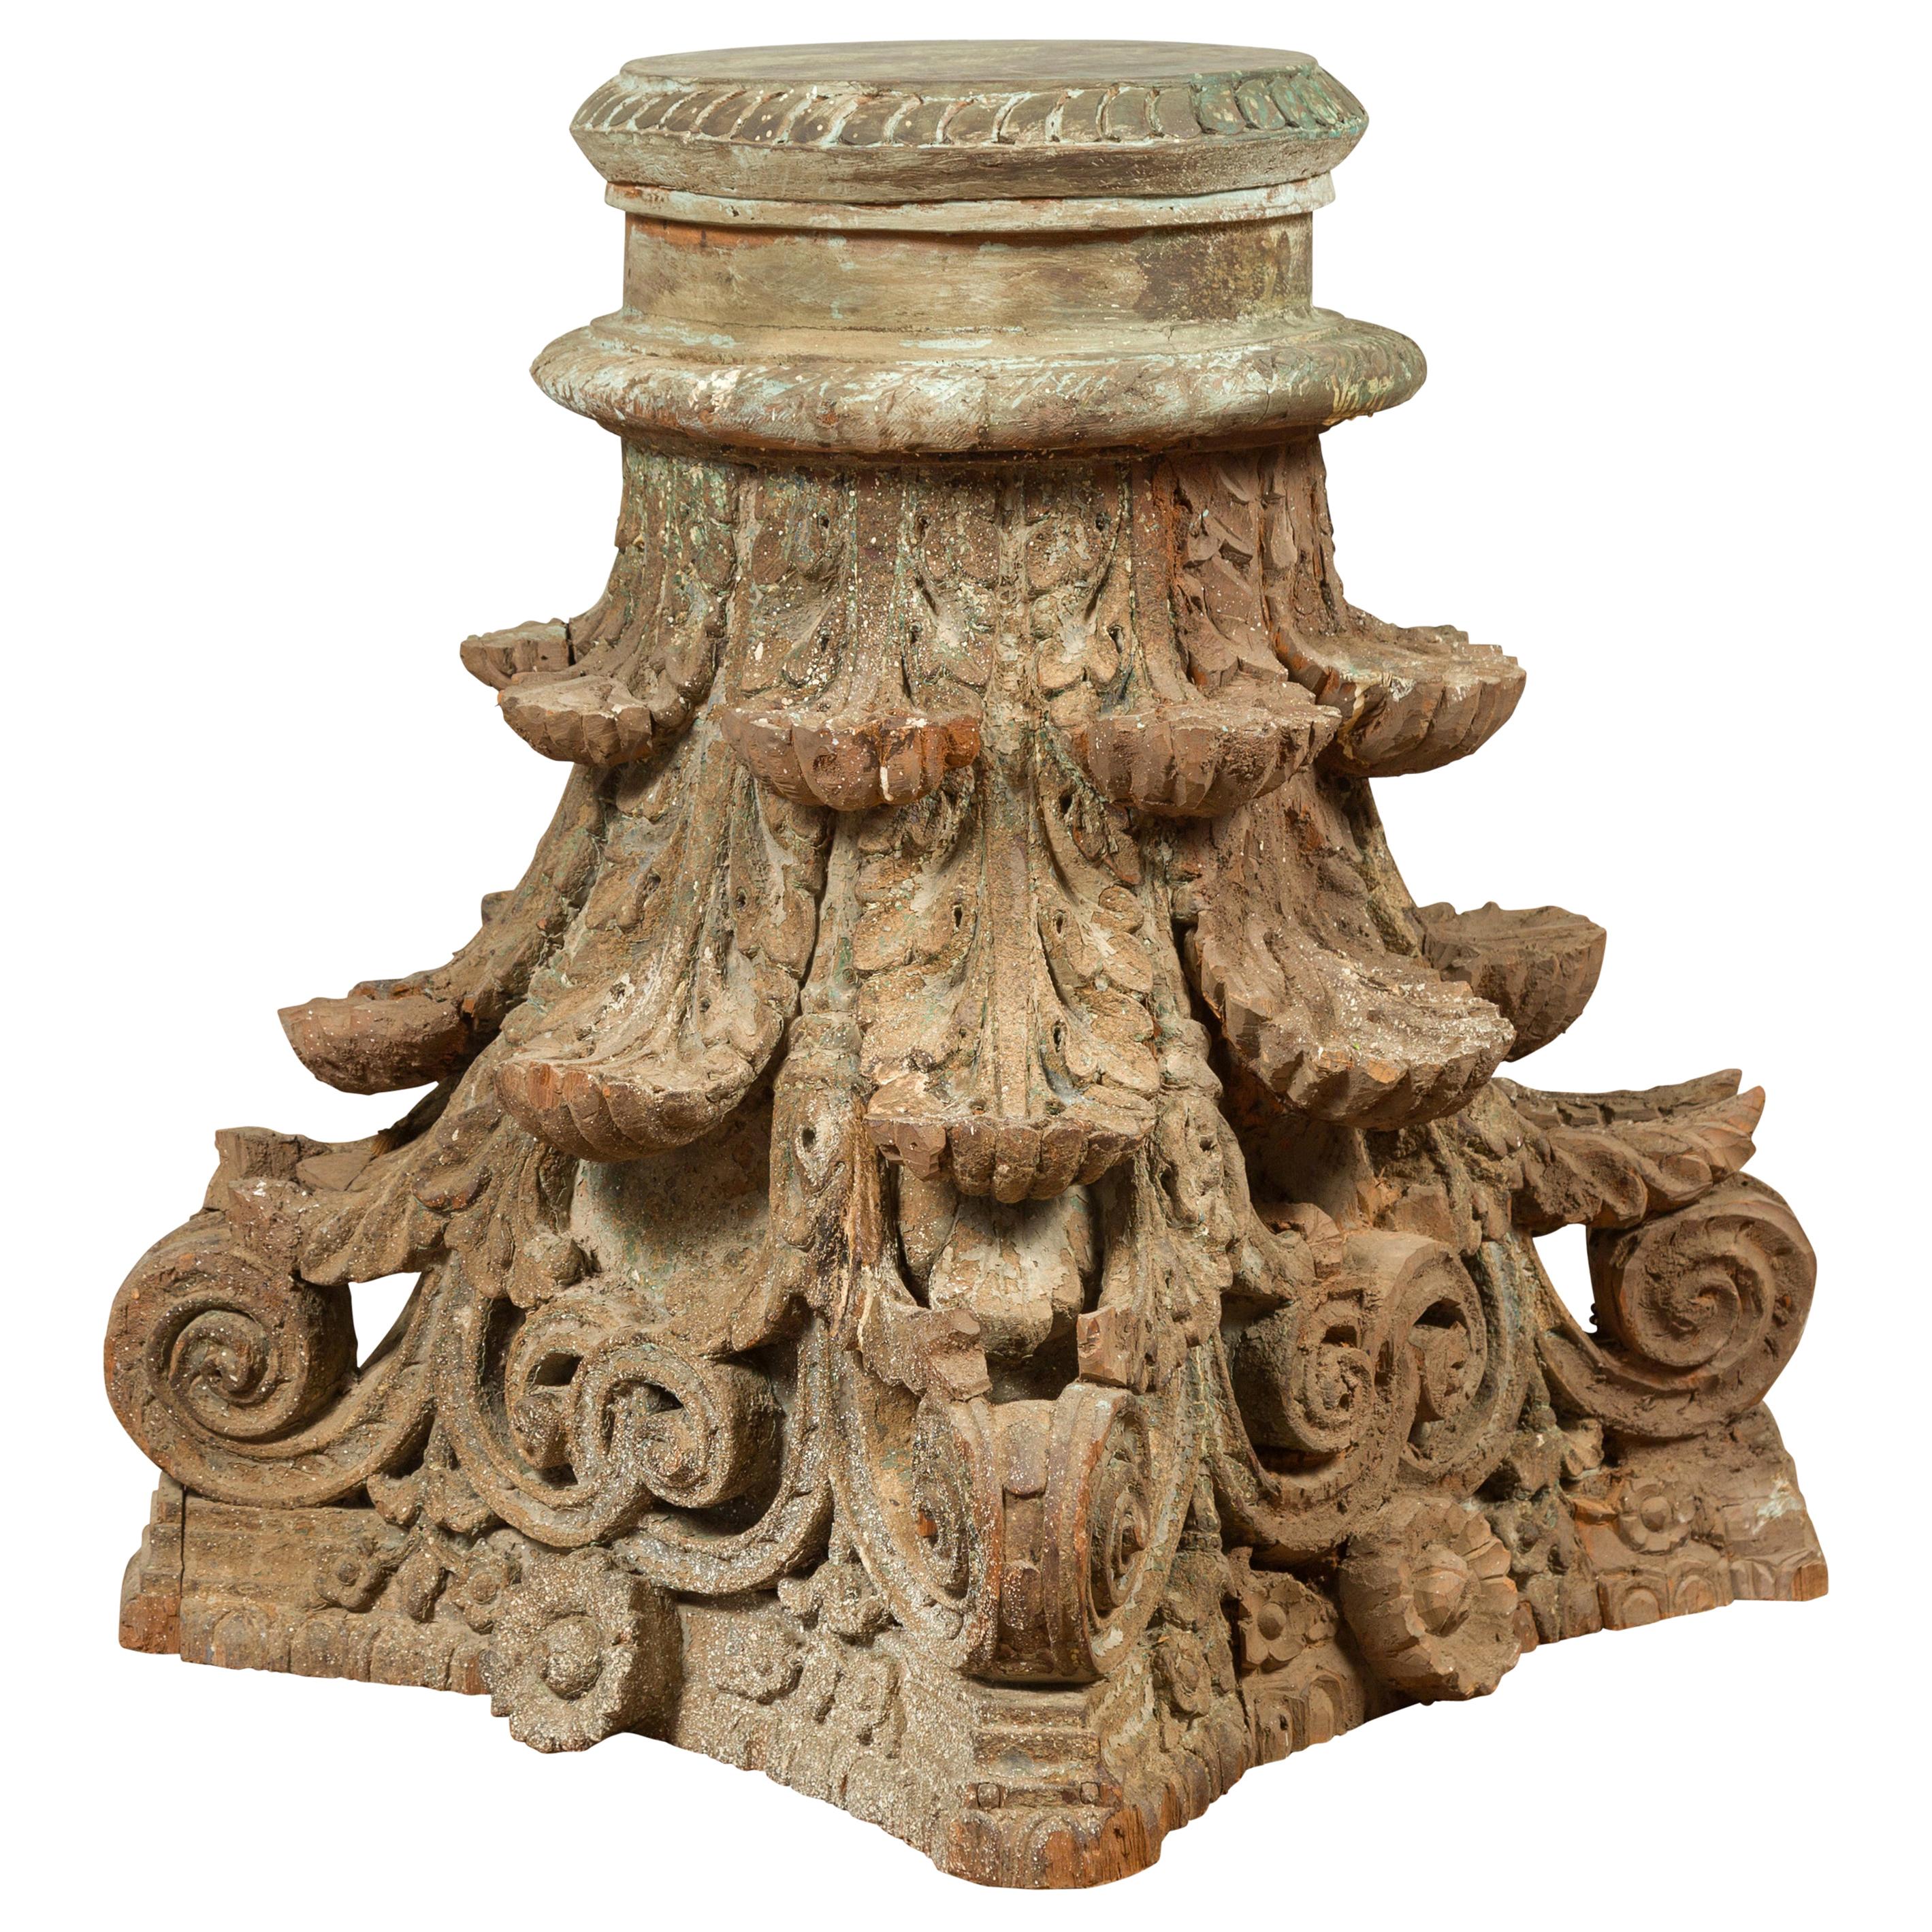 Antique Indian Corinthian Temple Capital Carving with Distressed Patina